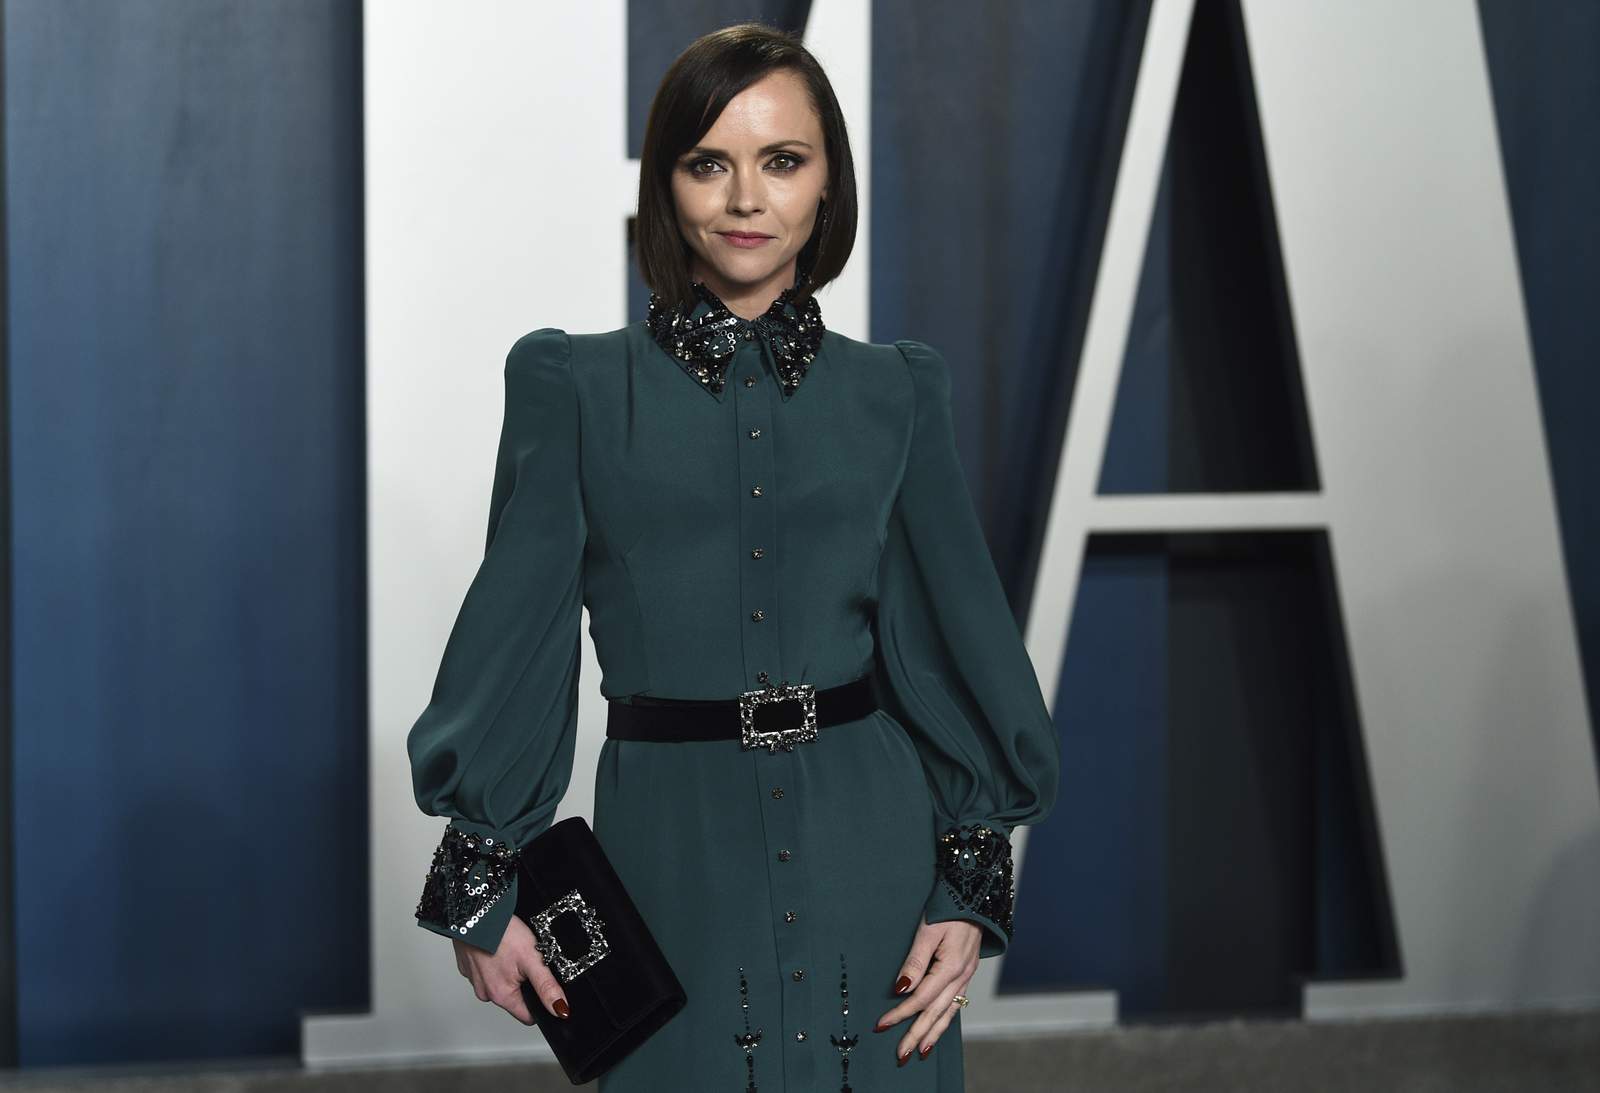 Christina Ricci files for divorce from husband of 7 years